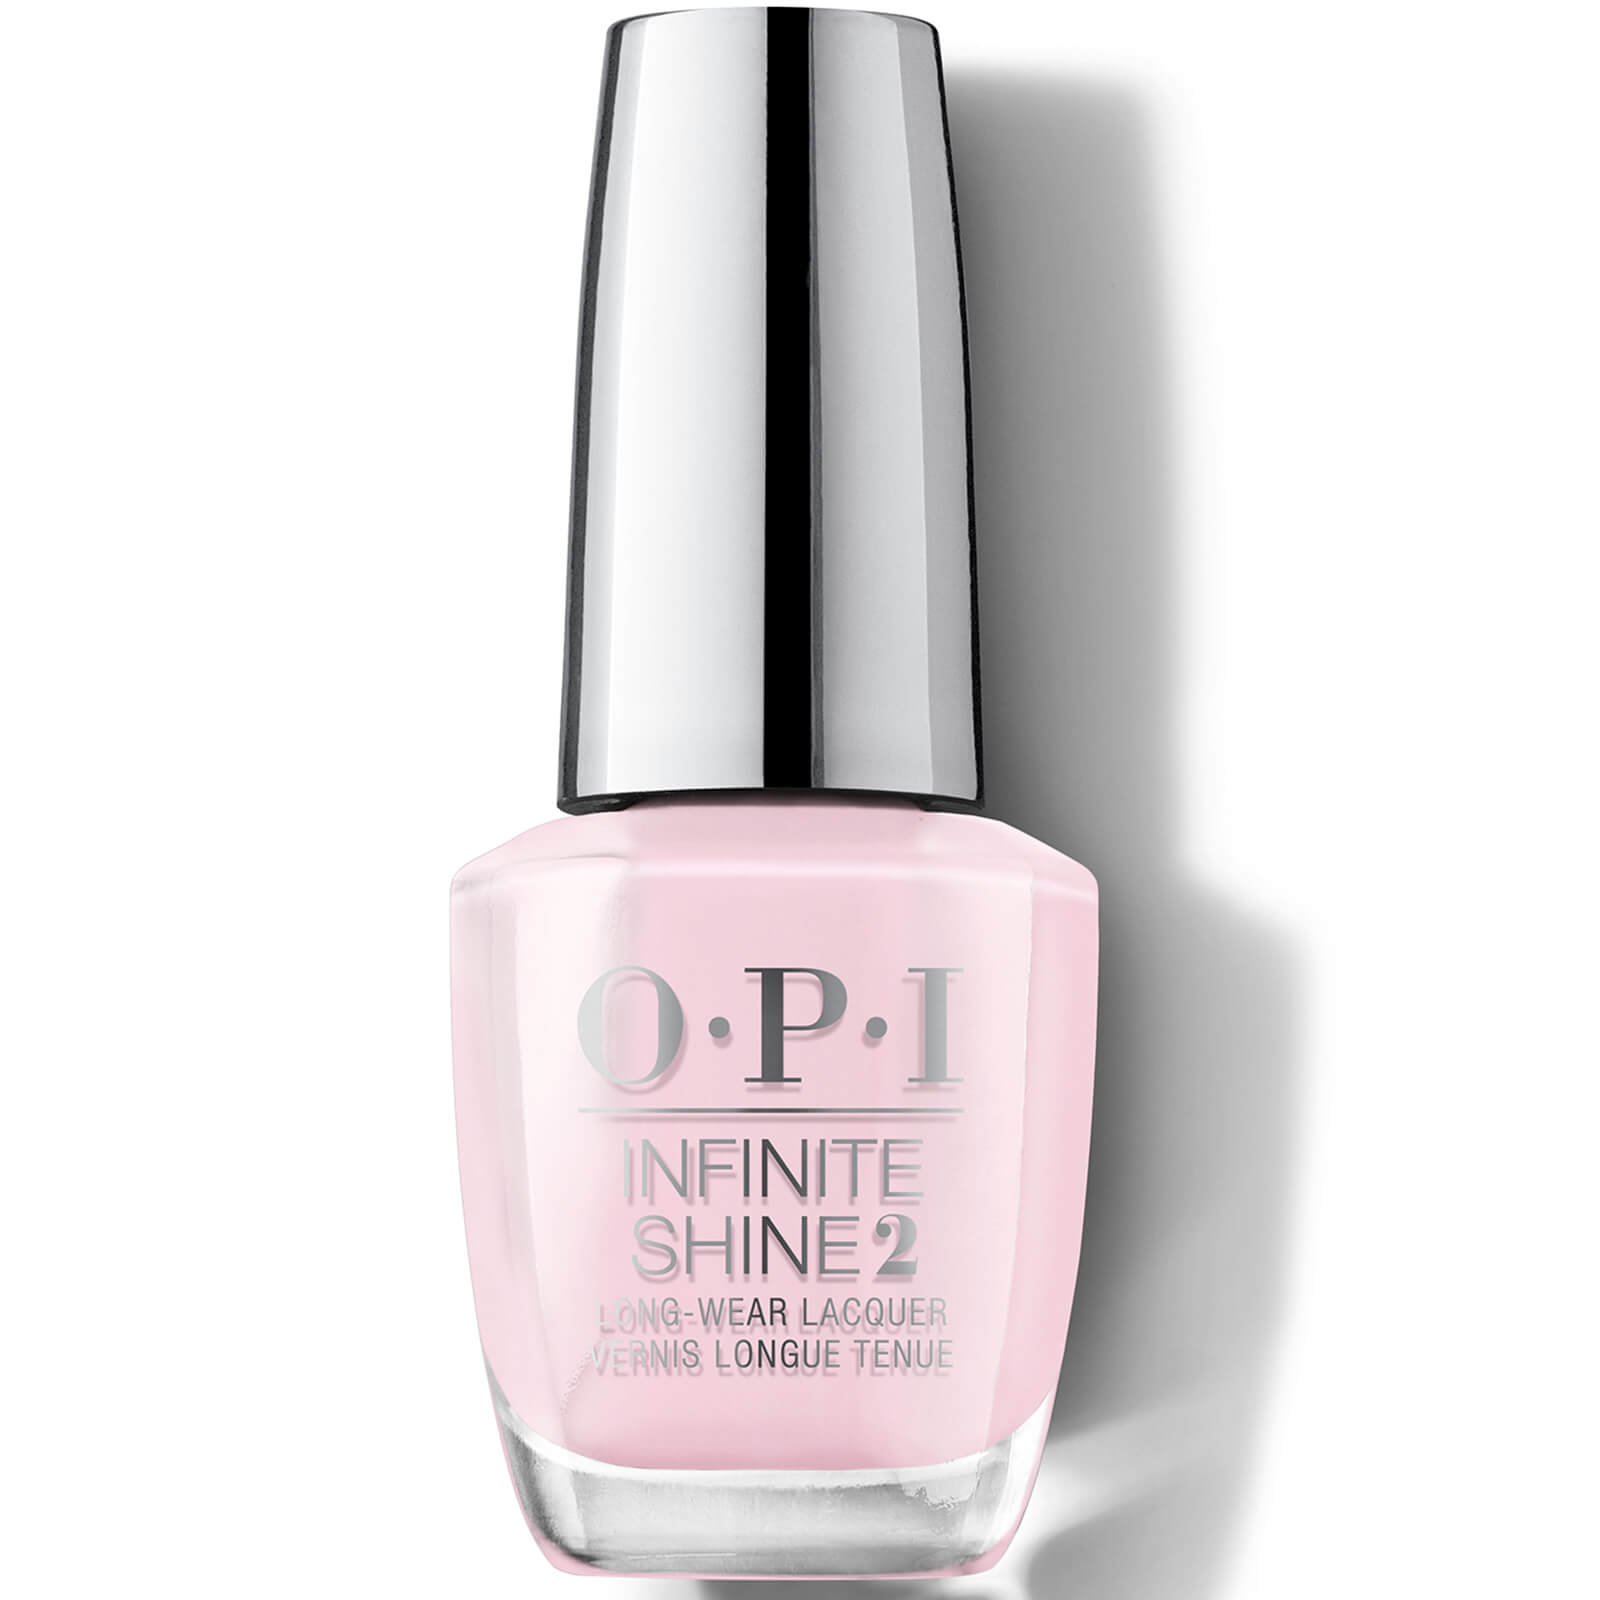 Opi Infinite Shine Long-wear Nail Polish (various Shades) - Mod About You In Mod About You        